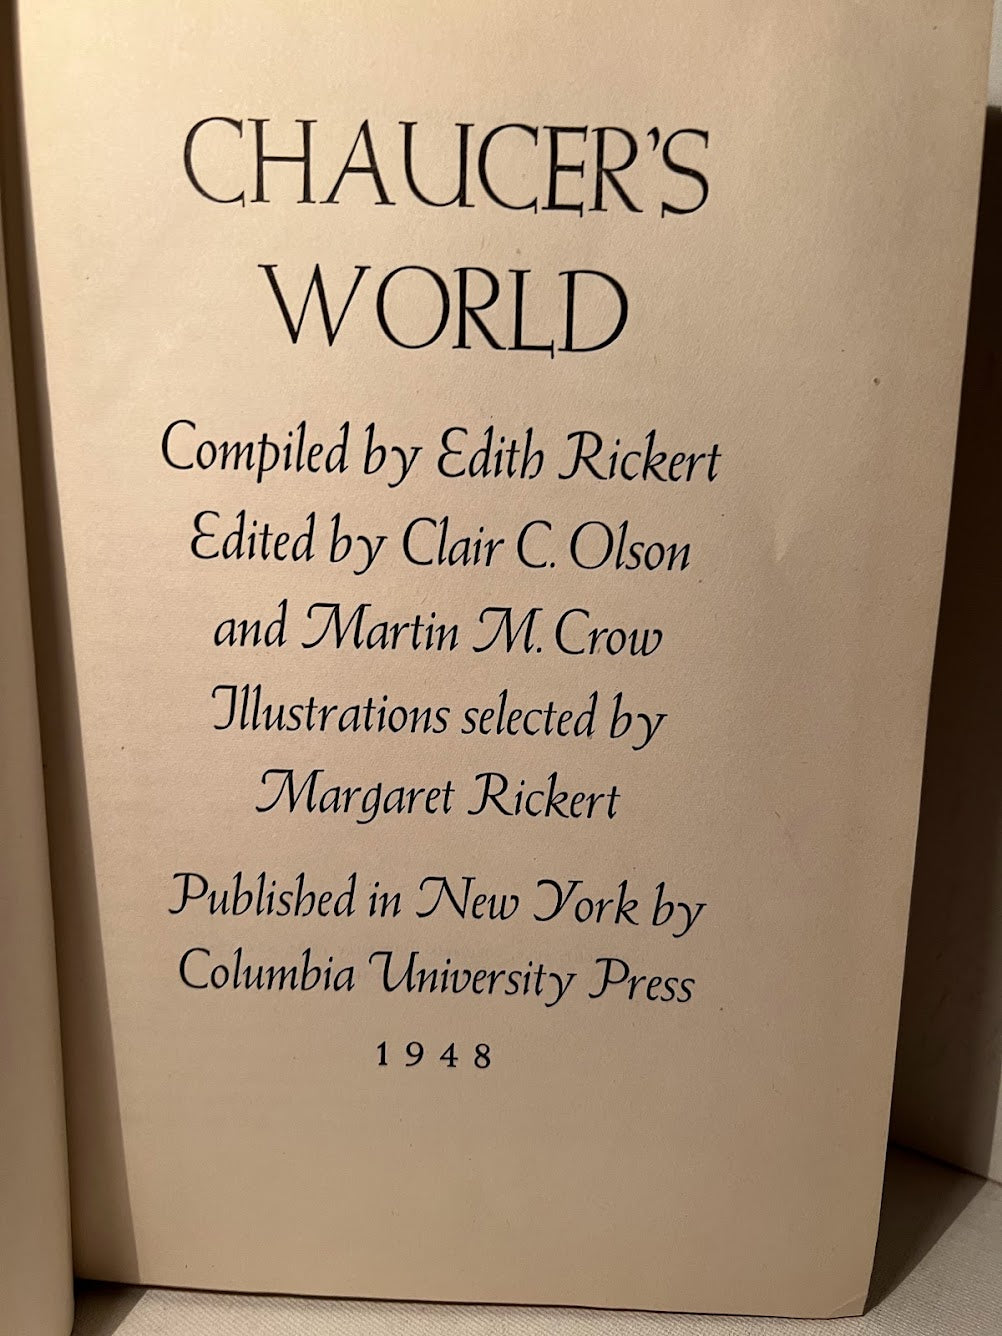 Chaucer's World compiled by Edith Rickert